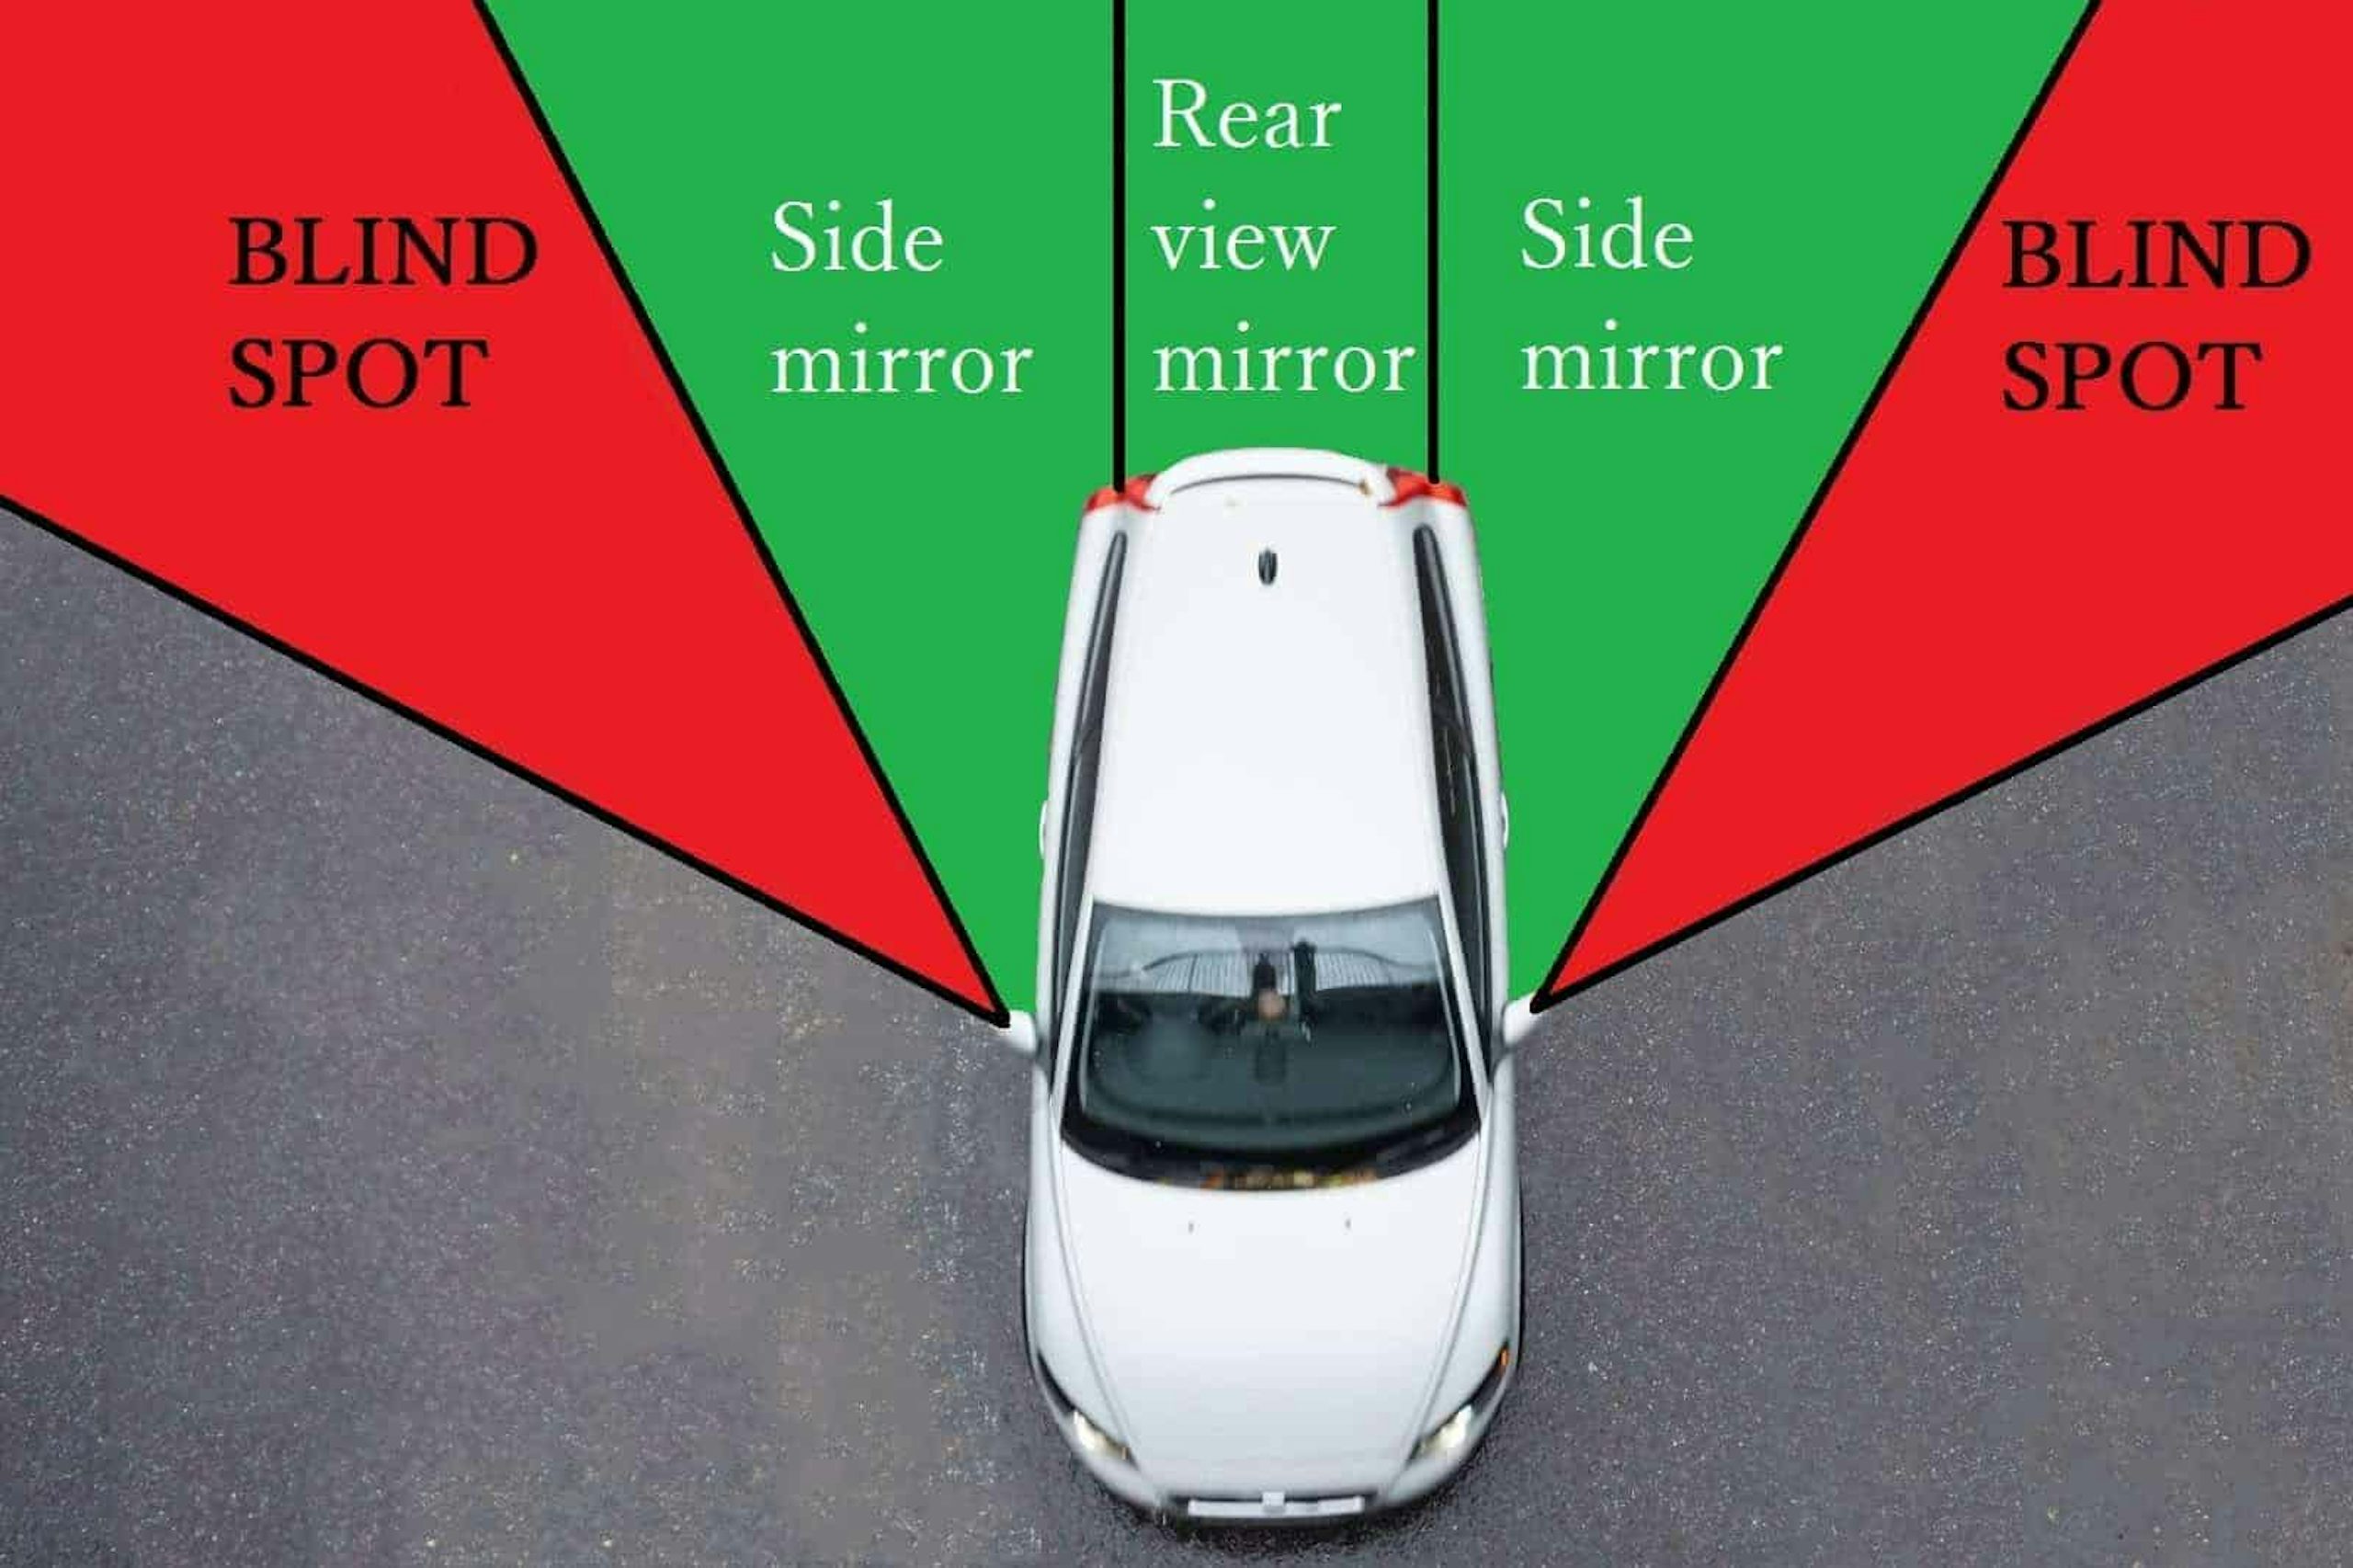 6 Tips How to Change Lanes Correctly and Avoid Accidents